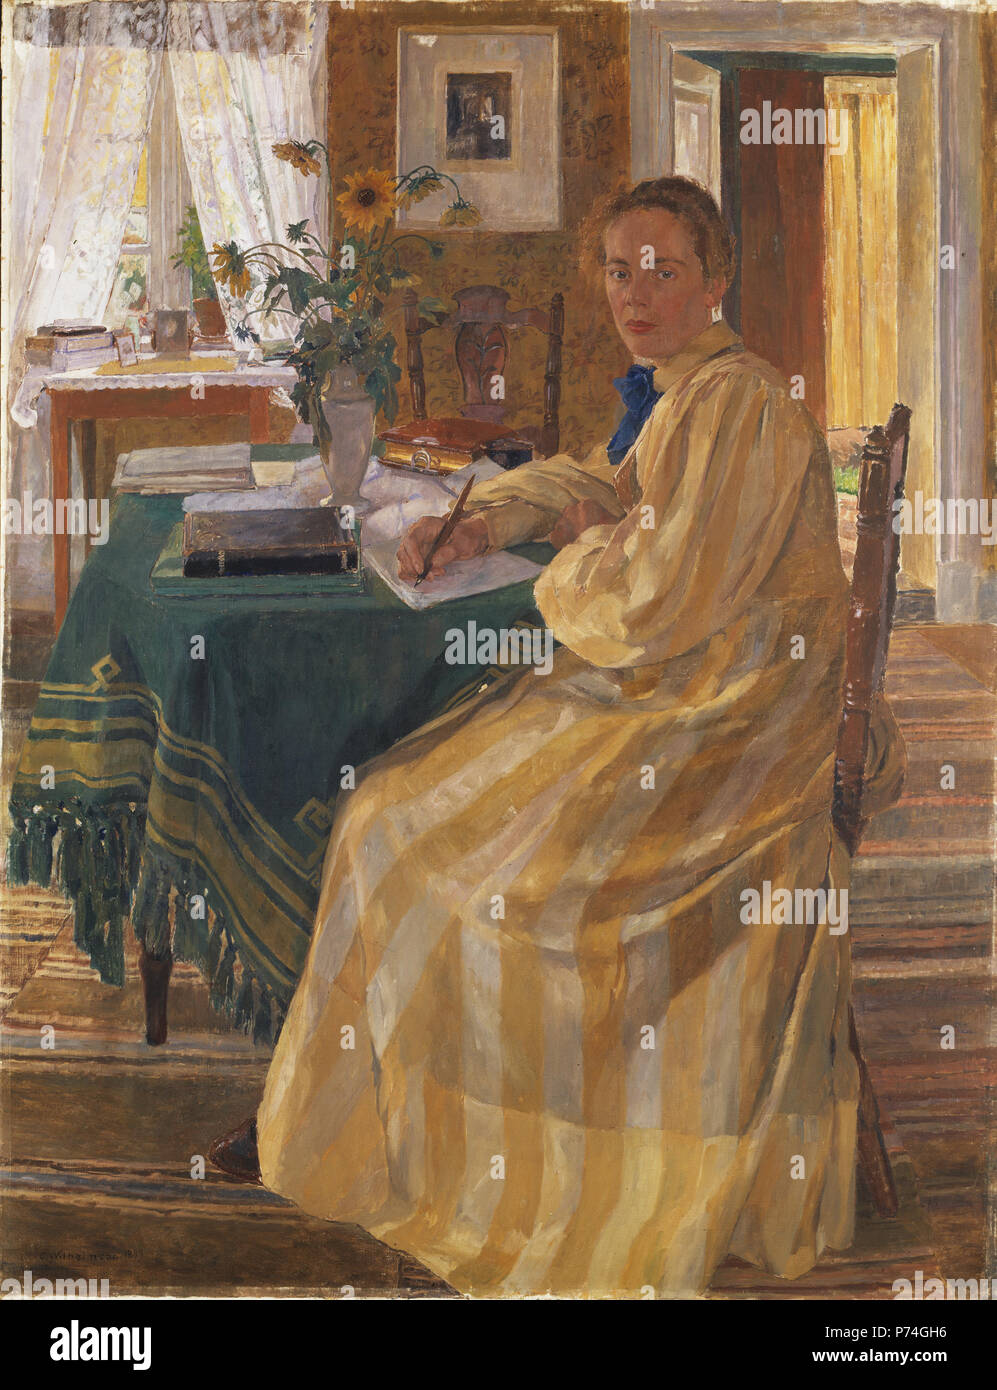 .  English: The Artist's Sister Svenska: Konstnärens syster .  English: Wilhelmson portrays his younger sister Anna wearing a yellow and white striped dress seated at a table writing – perhaps a letter. Briefly lifting her pen from the paper, she gazes at the viewer. The work was painted in their childhood home at Fiskebäckskil in Bohuslän. The sun shines brightly through the window’s lace curtains and the open door. The entire room is sunlit, which evokes the feeling of an idyllic summer. The yellow colour is echoed in the walls, textiles and flowers. Svenska: Wilhelmson har här avbildat sin  Stock Photo